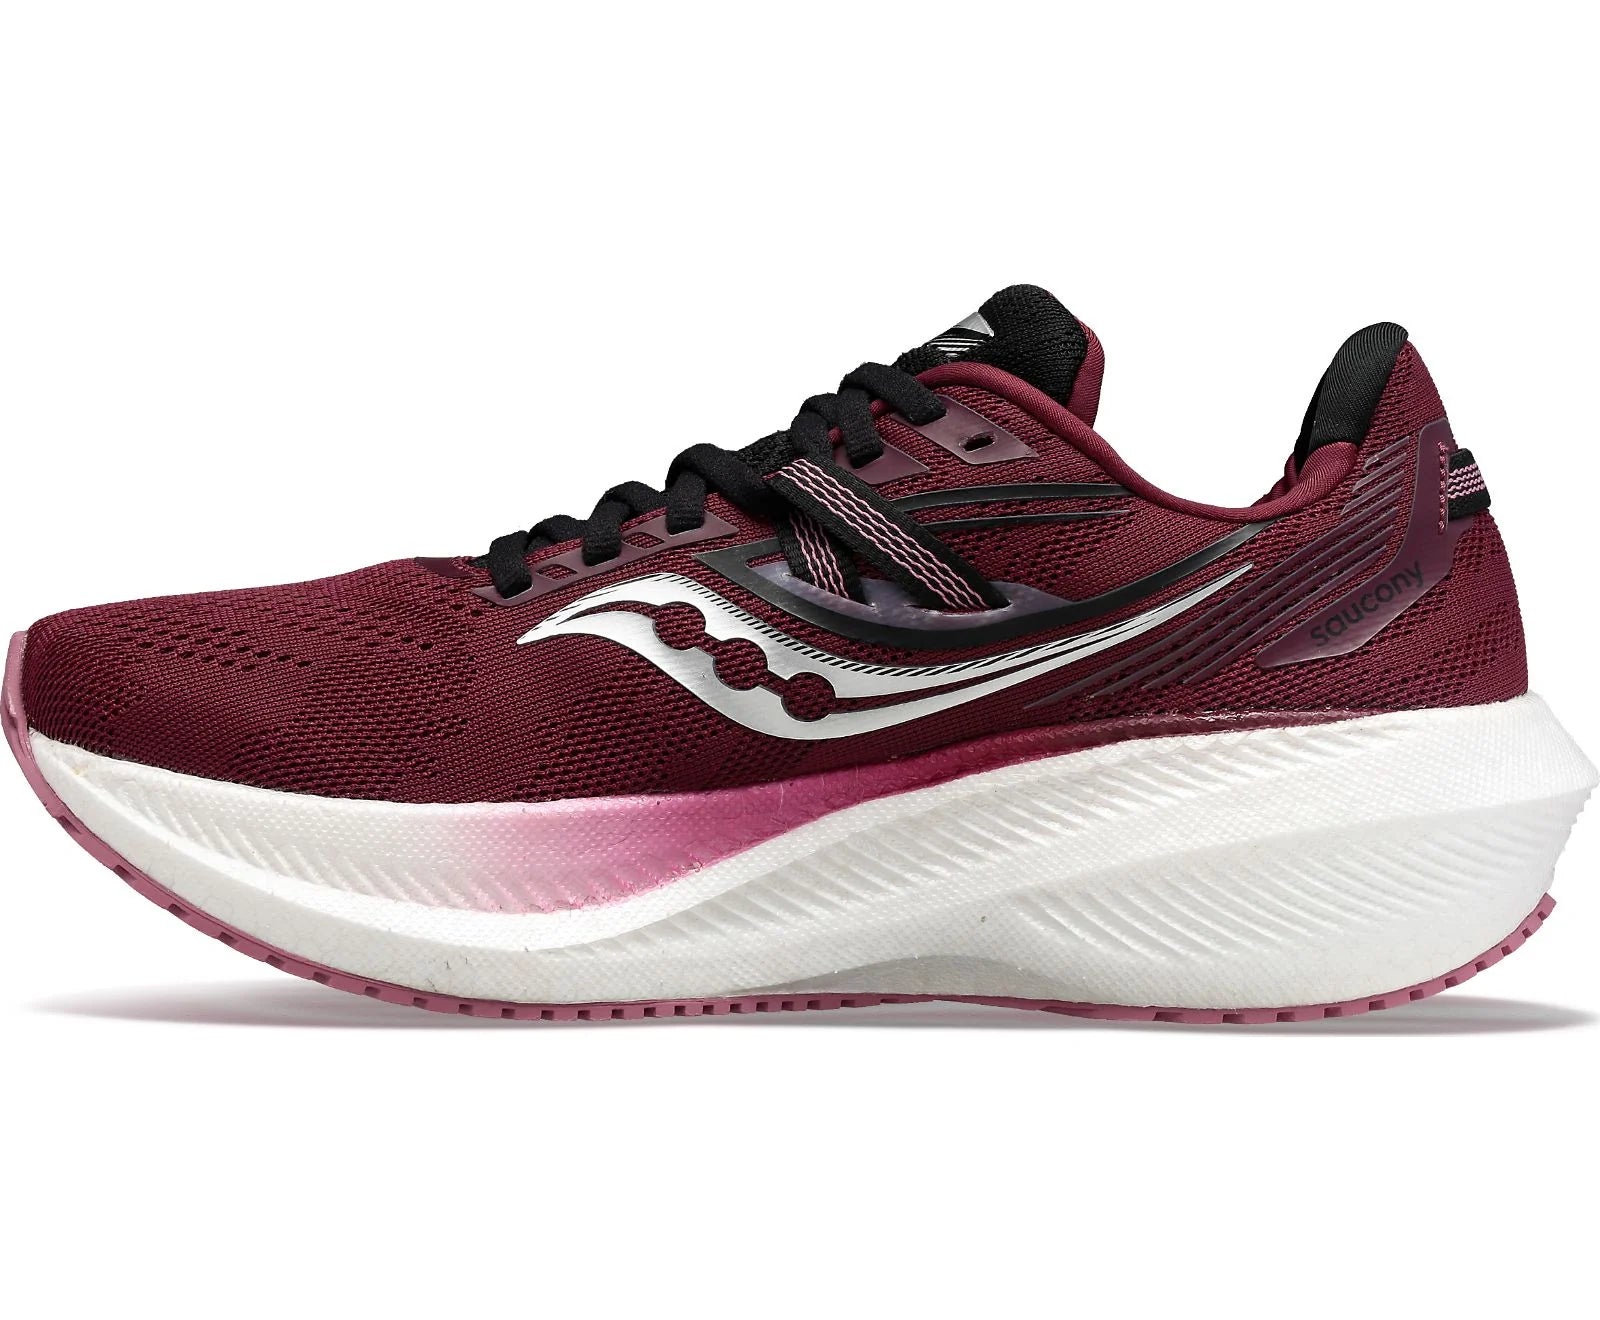 Medial view of the Women's Triumph 20 by Saucony in the color Sundown / Rose